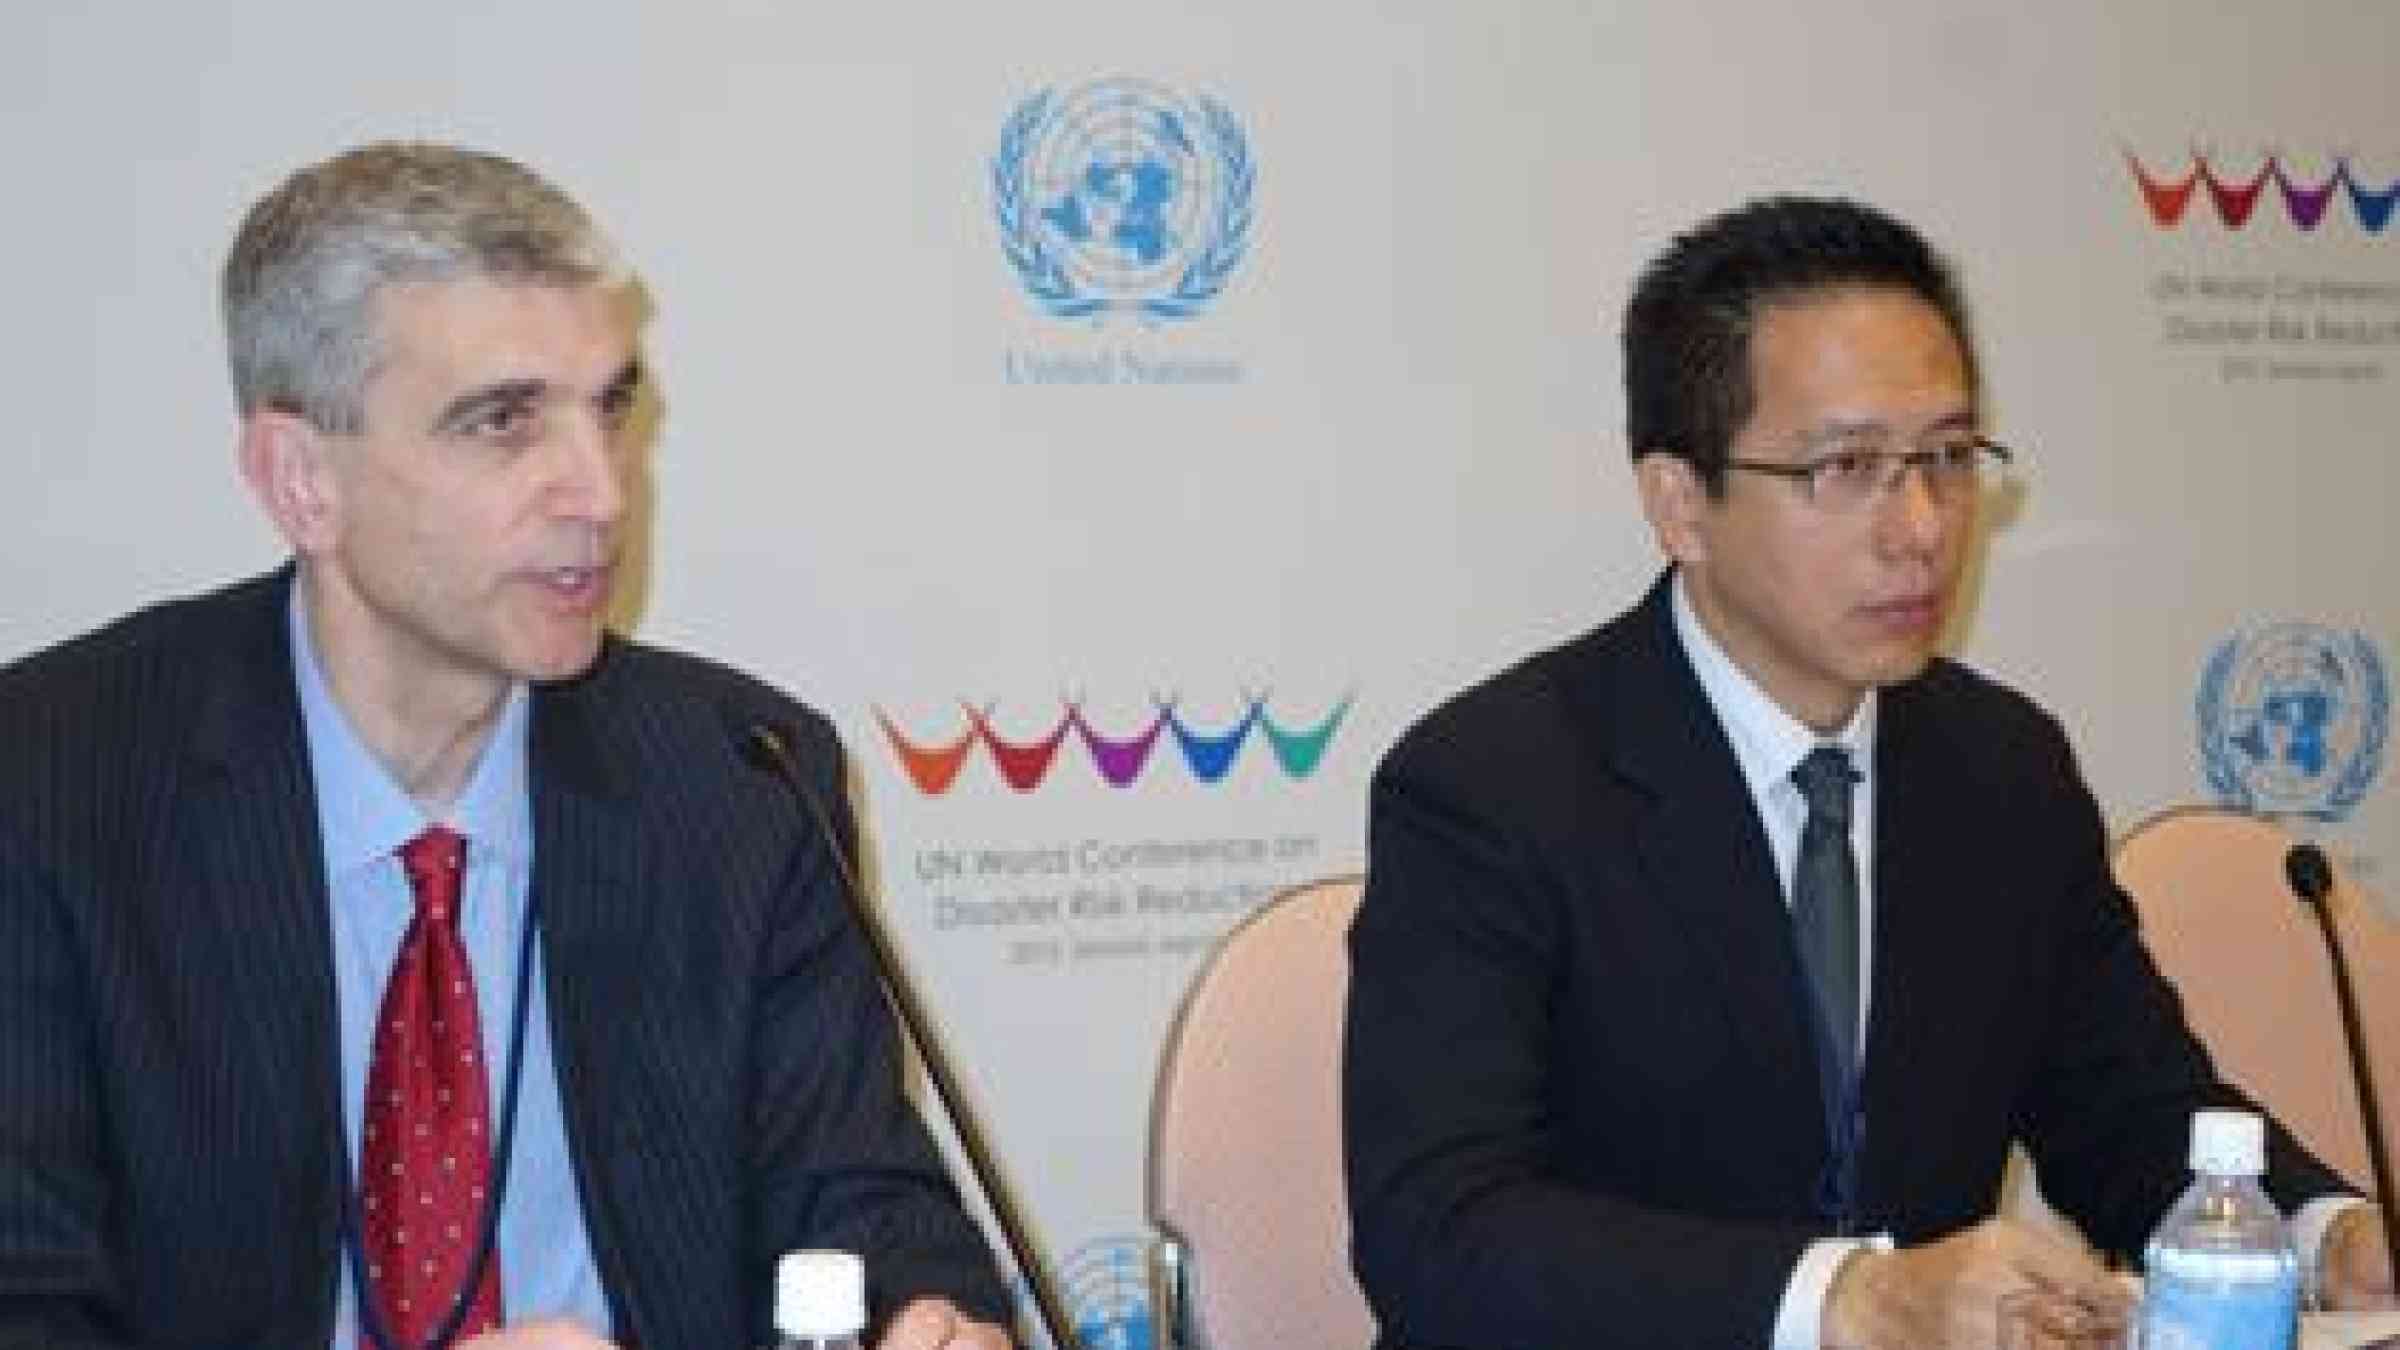 (from left) Dr. Milan Simic, AIR Worldwide, and Jerry Velasquez, UNISDR, briefing the media on a new study on economic losses from natural disasters at the World Conference on Disaster Risk Reduction in Sendai, Japan. (Photo: UNISDR)